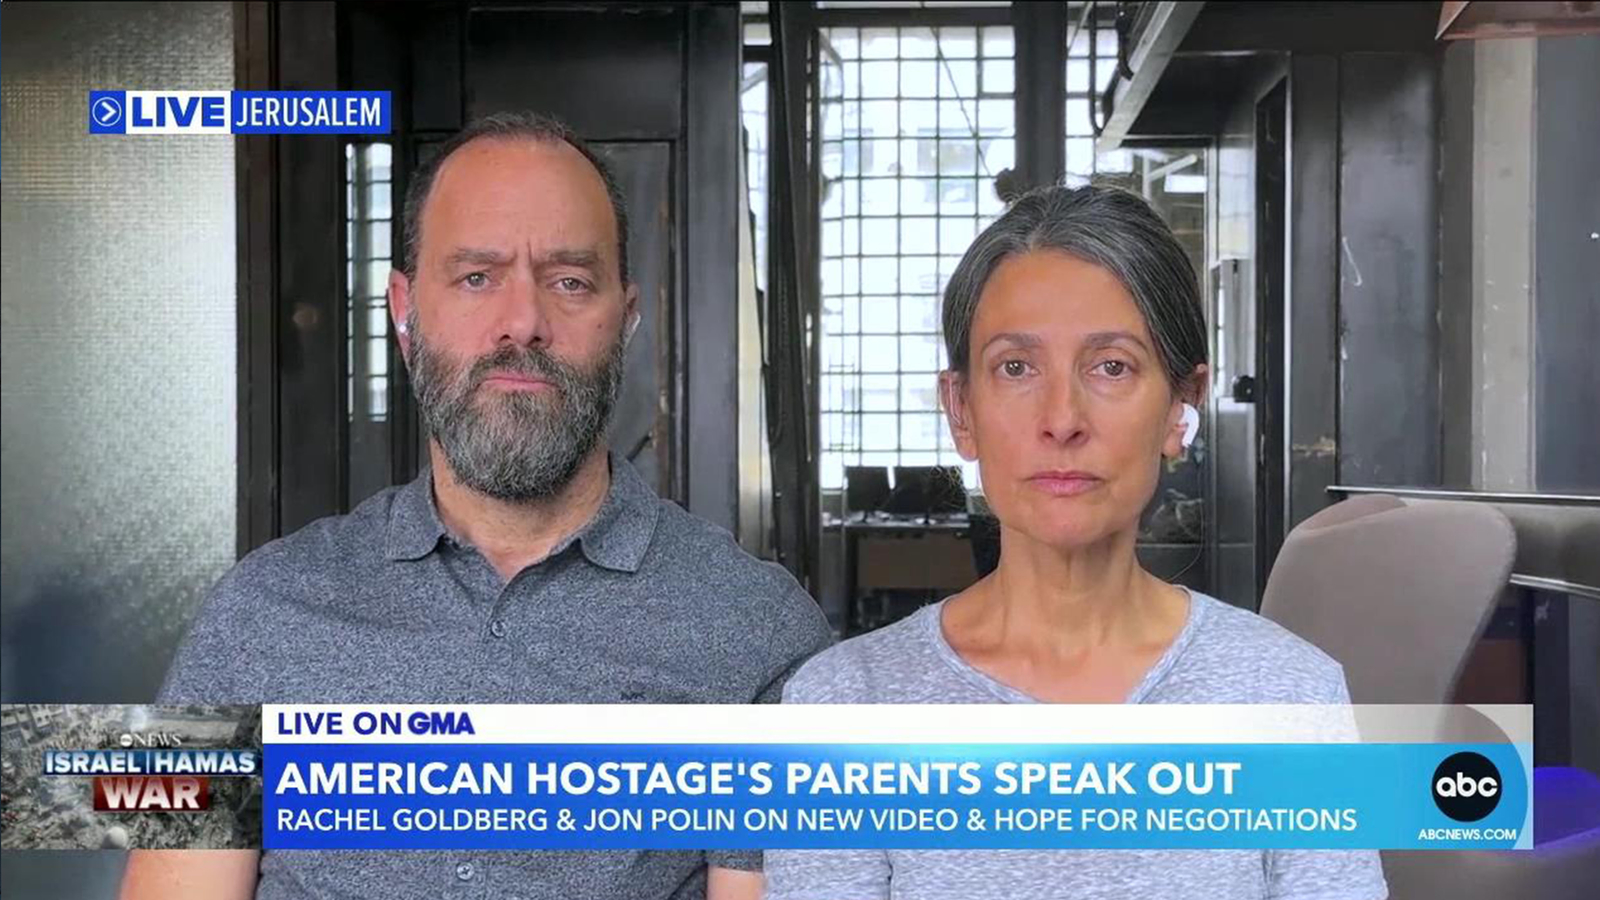 Video of kidnapped son brings 'total mix' of emotions, say parents of Hamas hostage